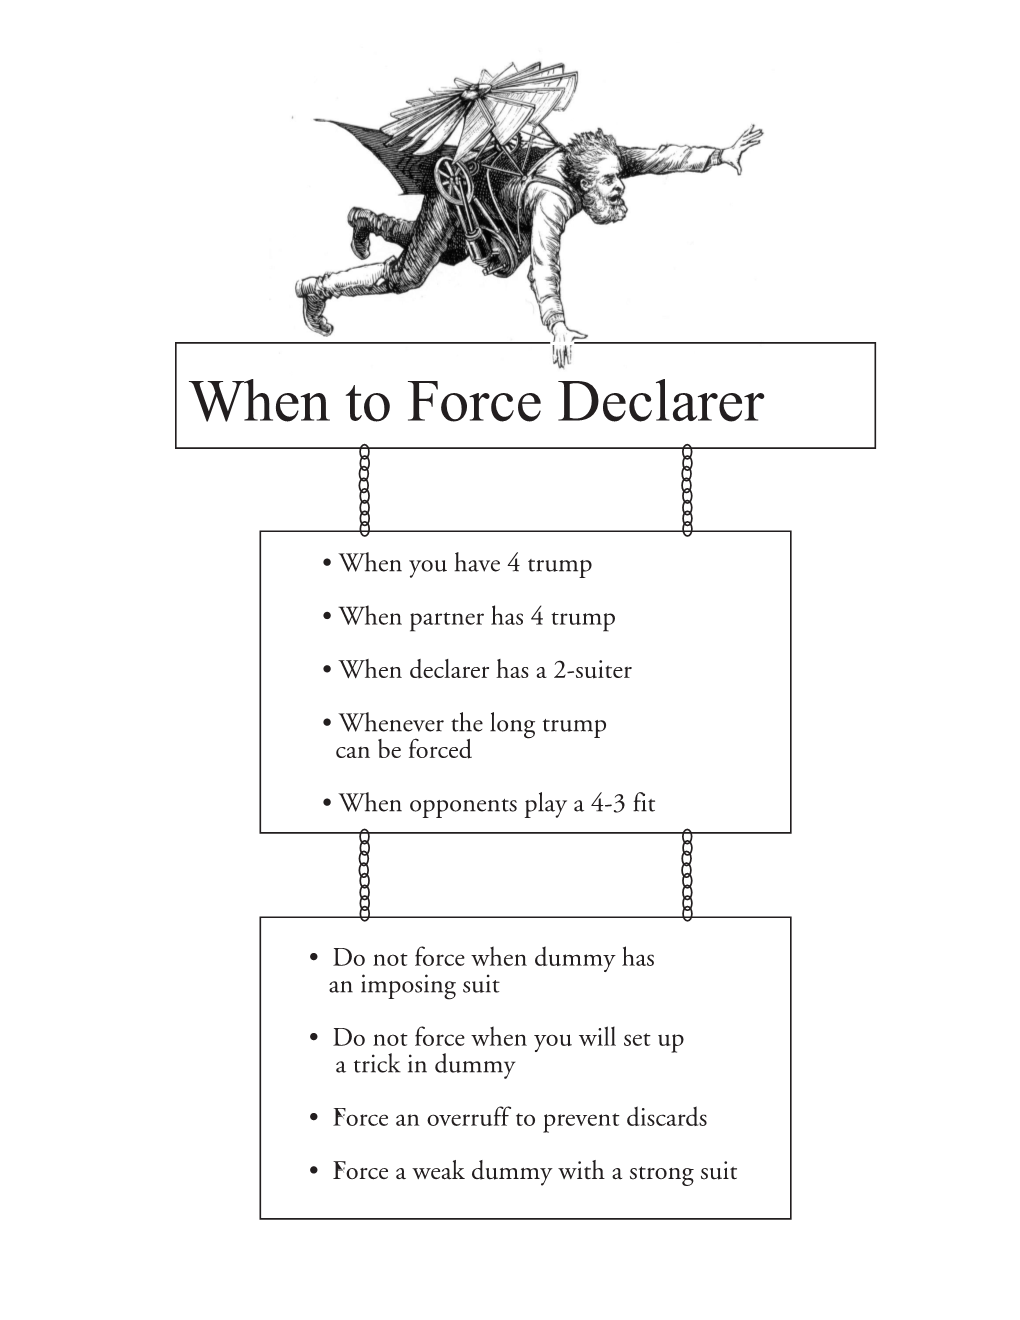 When to Force Declarer